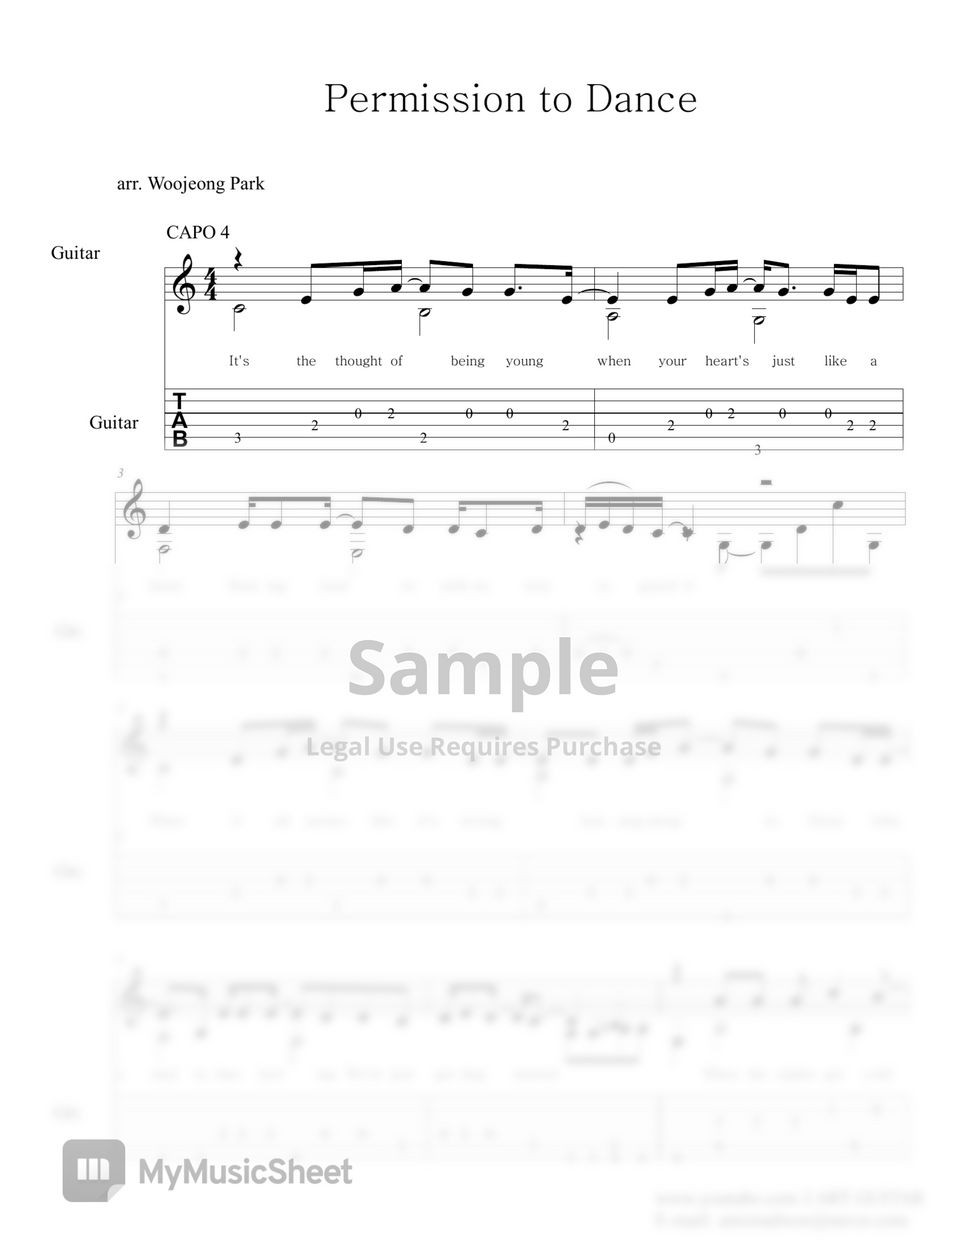 BTS - Permission to Dance (GUITAR TAB) by Woojeong Park